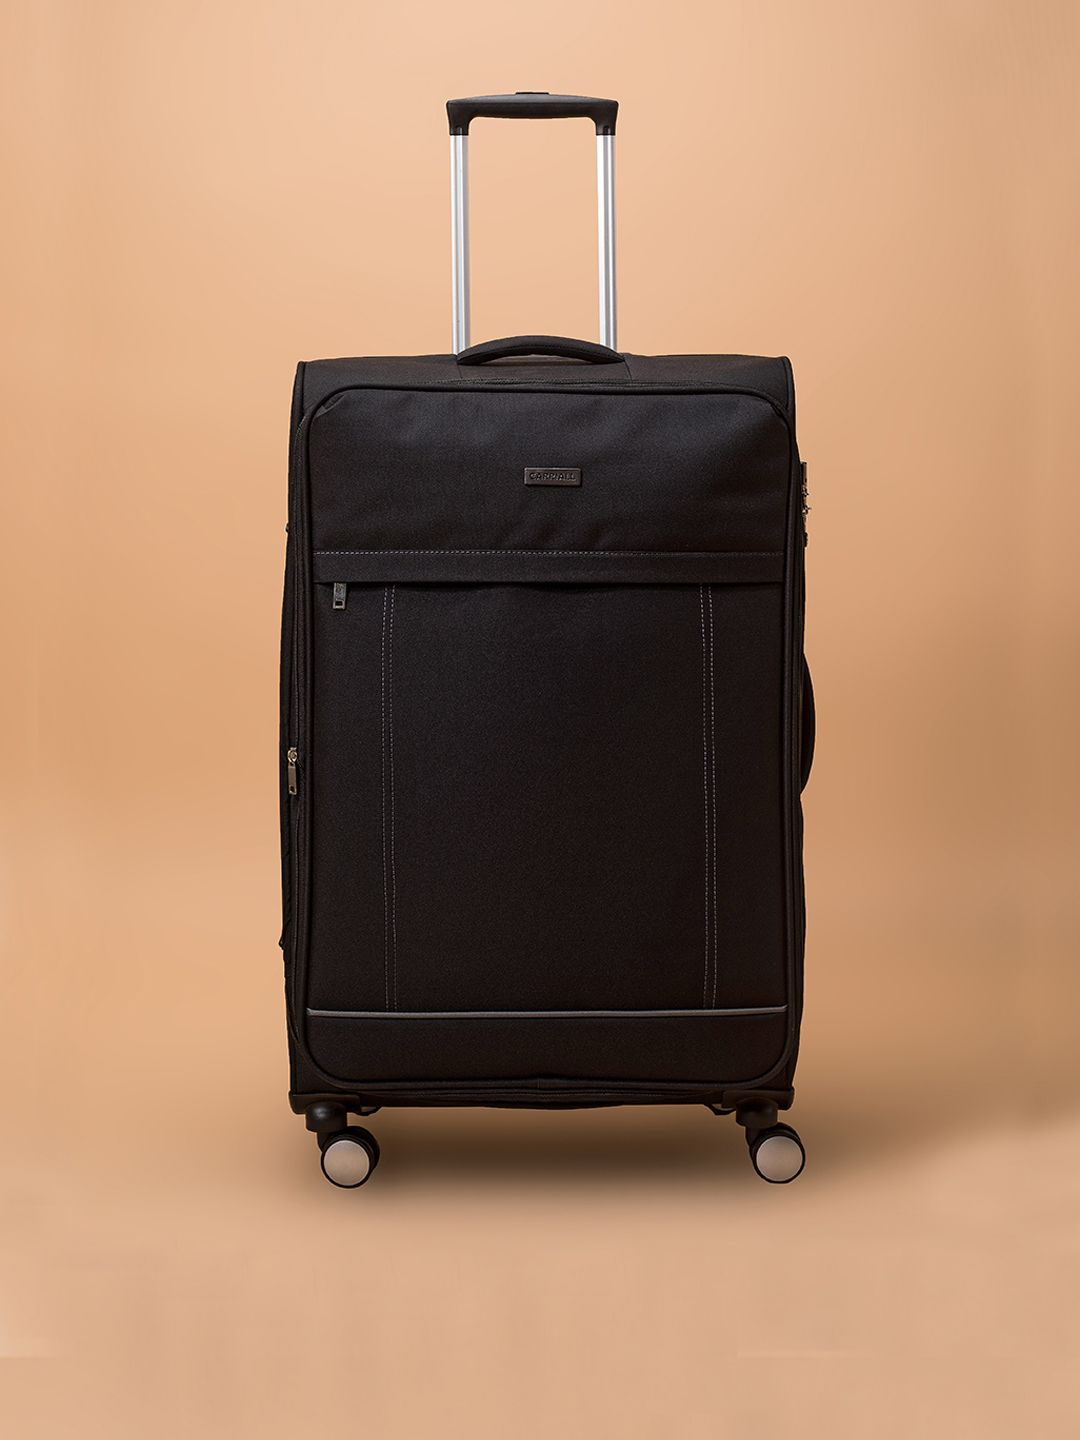 CARRIALL Black Solid Soft-Sided Medium Trolley Suitcase Price in India